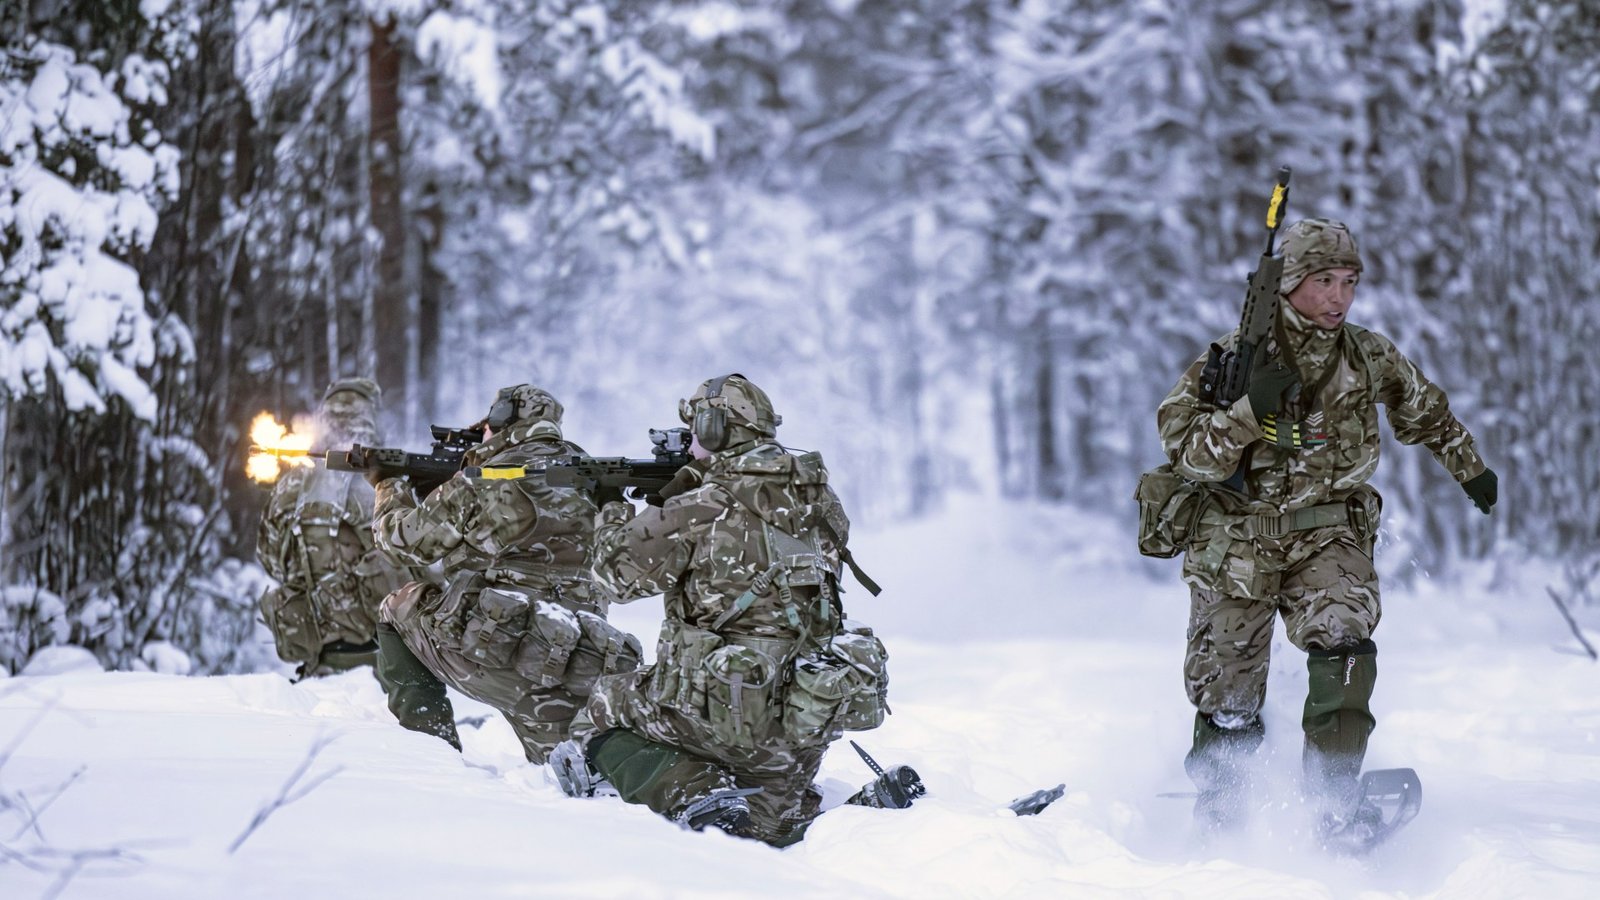 British troops train in Norwegian snow – as they prepare for war in the Arctic